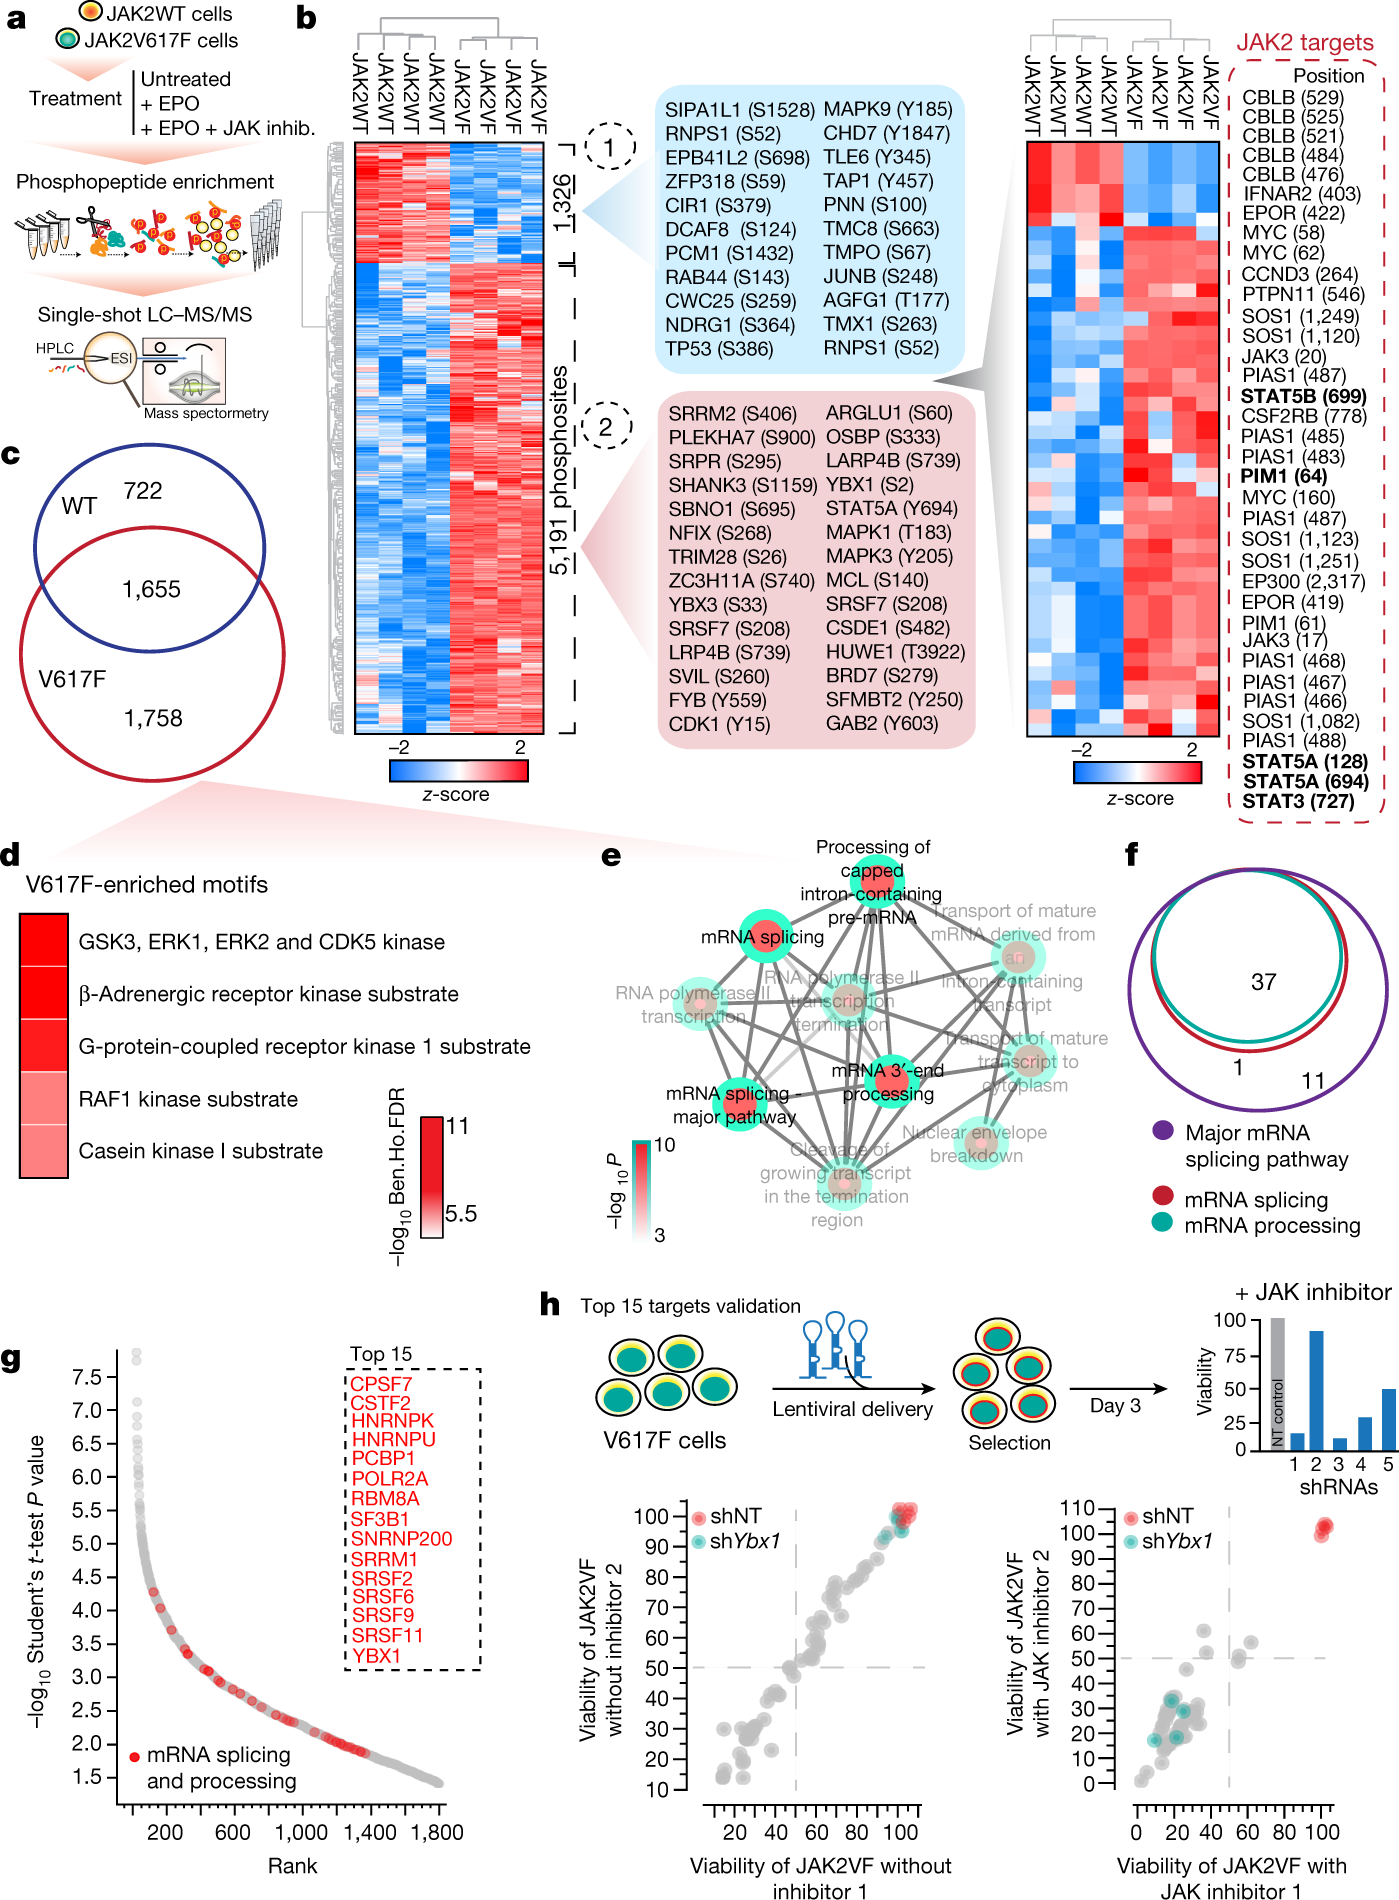 Splicing factor YBX1 mediates persistence of JAK2-mutated neoplasms | Nature